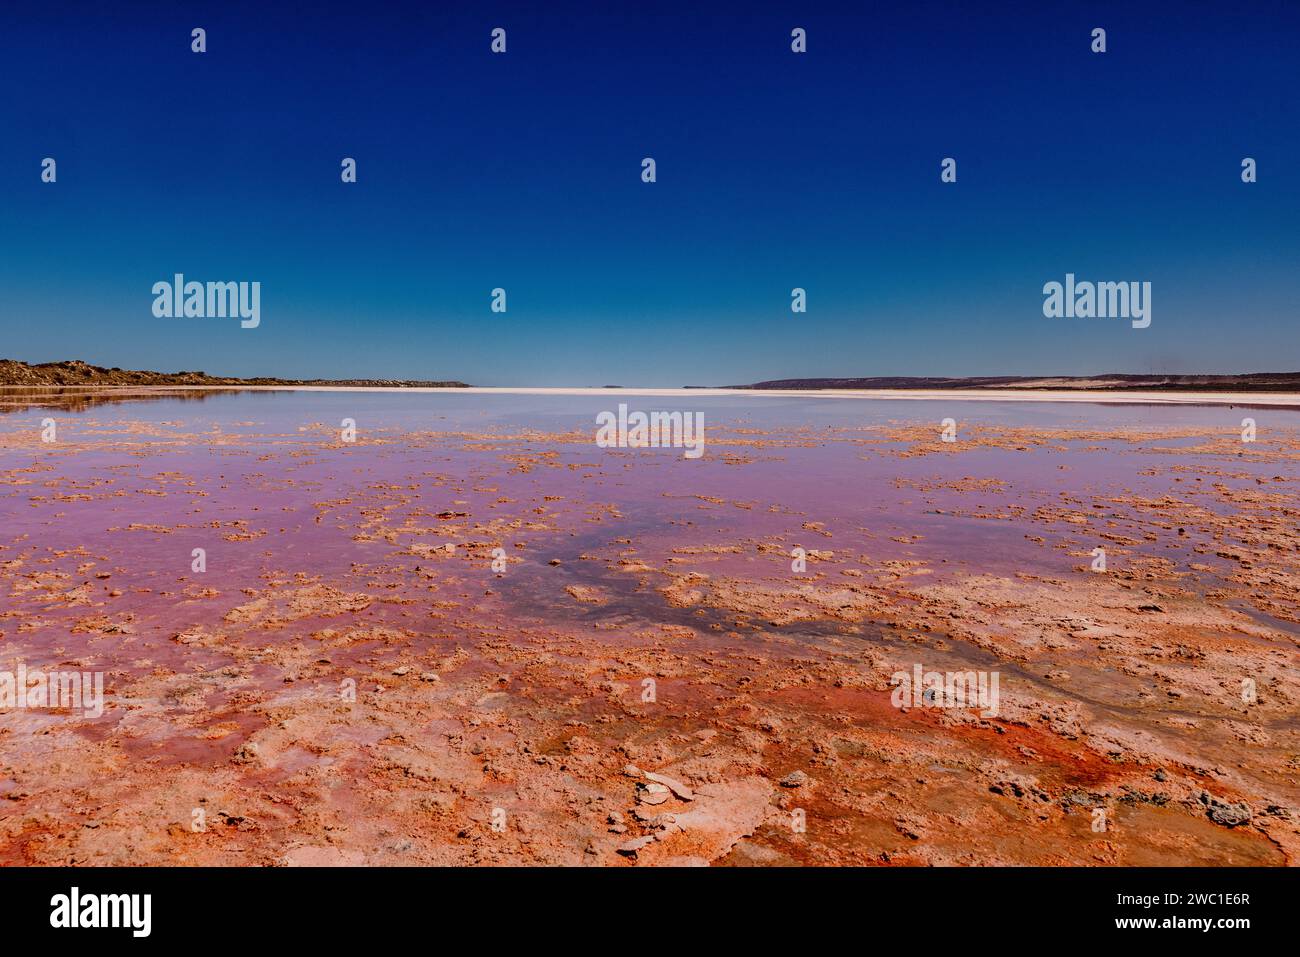 A beautiful landscape with shallow water against the background of a blue sky. Western Australia Stock Photo